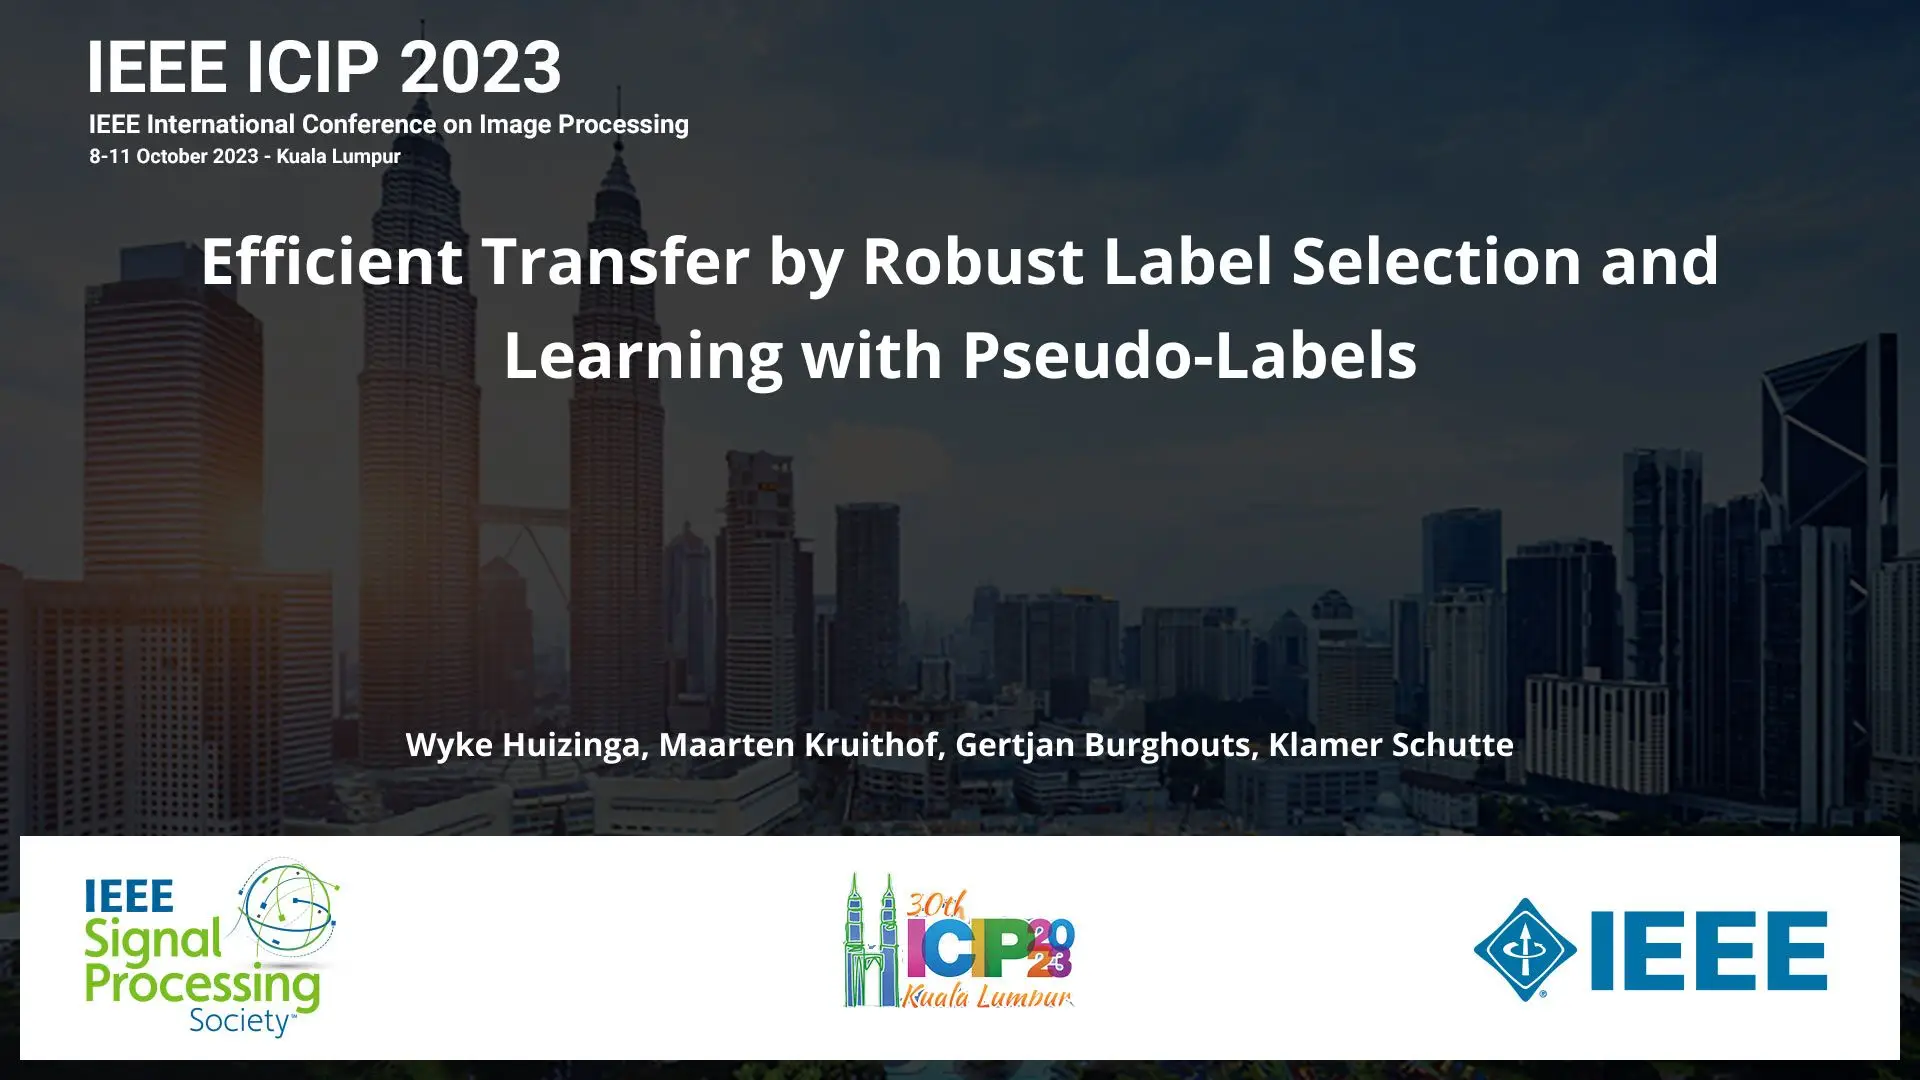 Efficient Transfer by Robust Label Selection and Learning with Pseudo-Labels